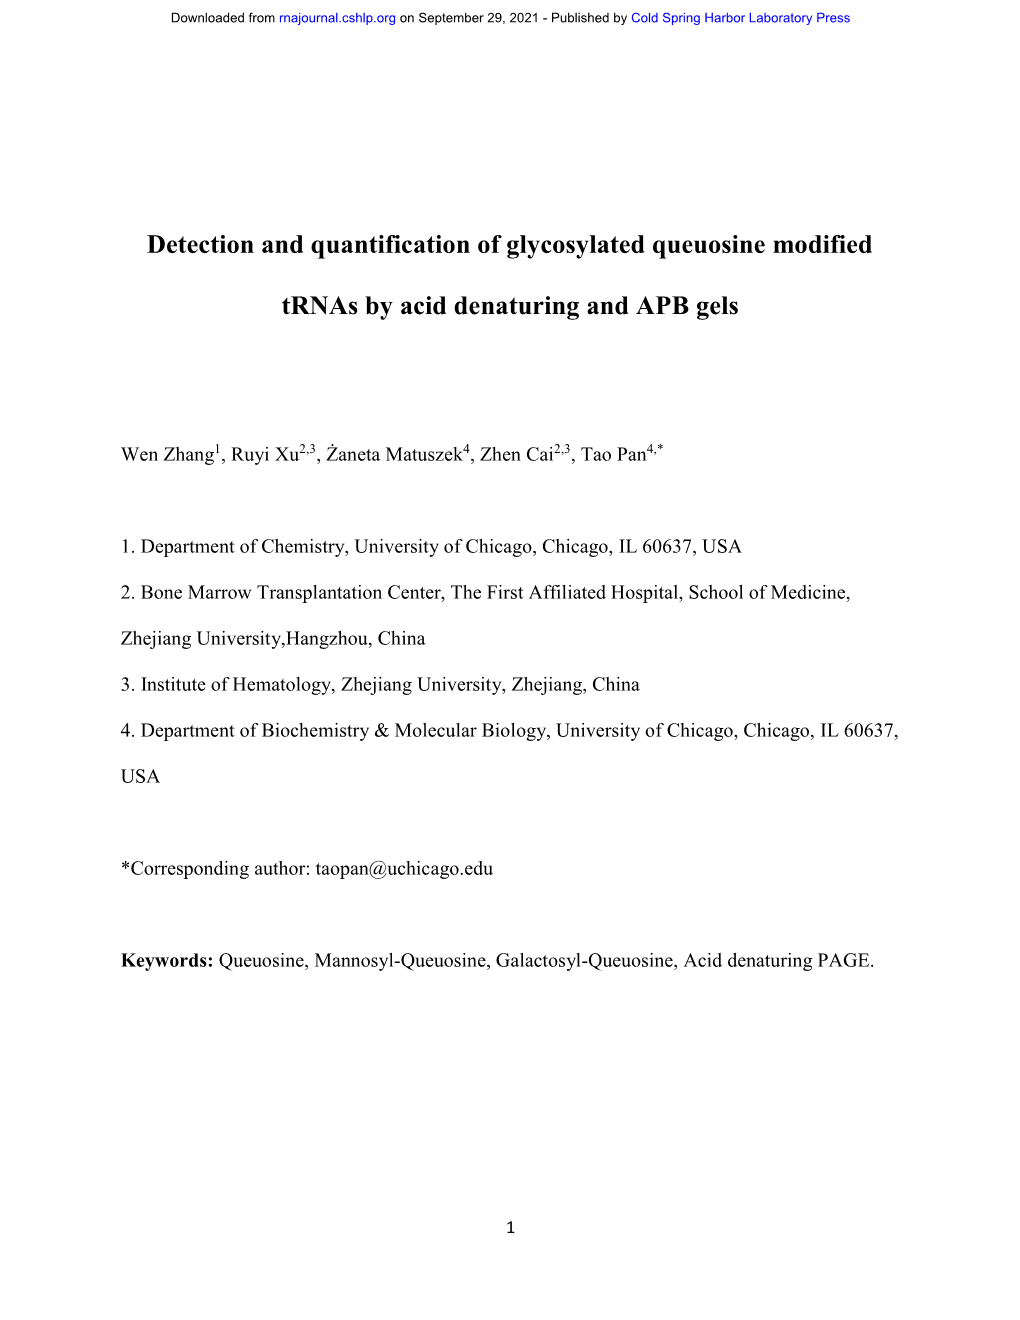 Detection and Quantification of Glycosylated Queuosine Modified